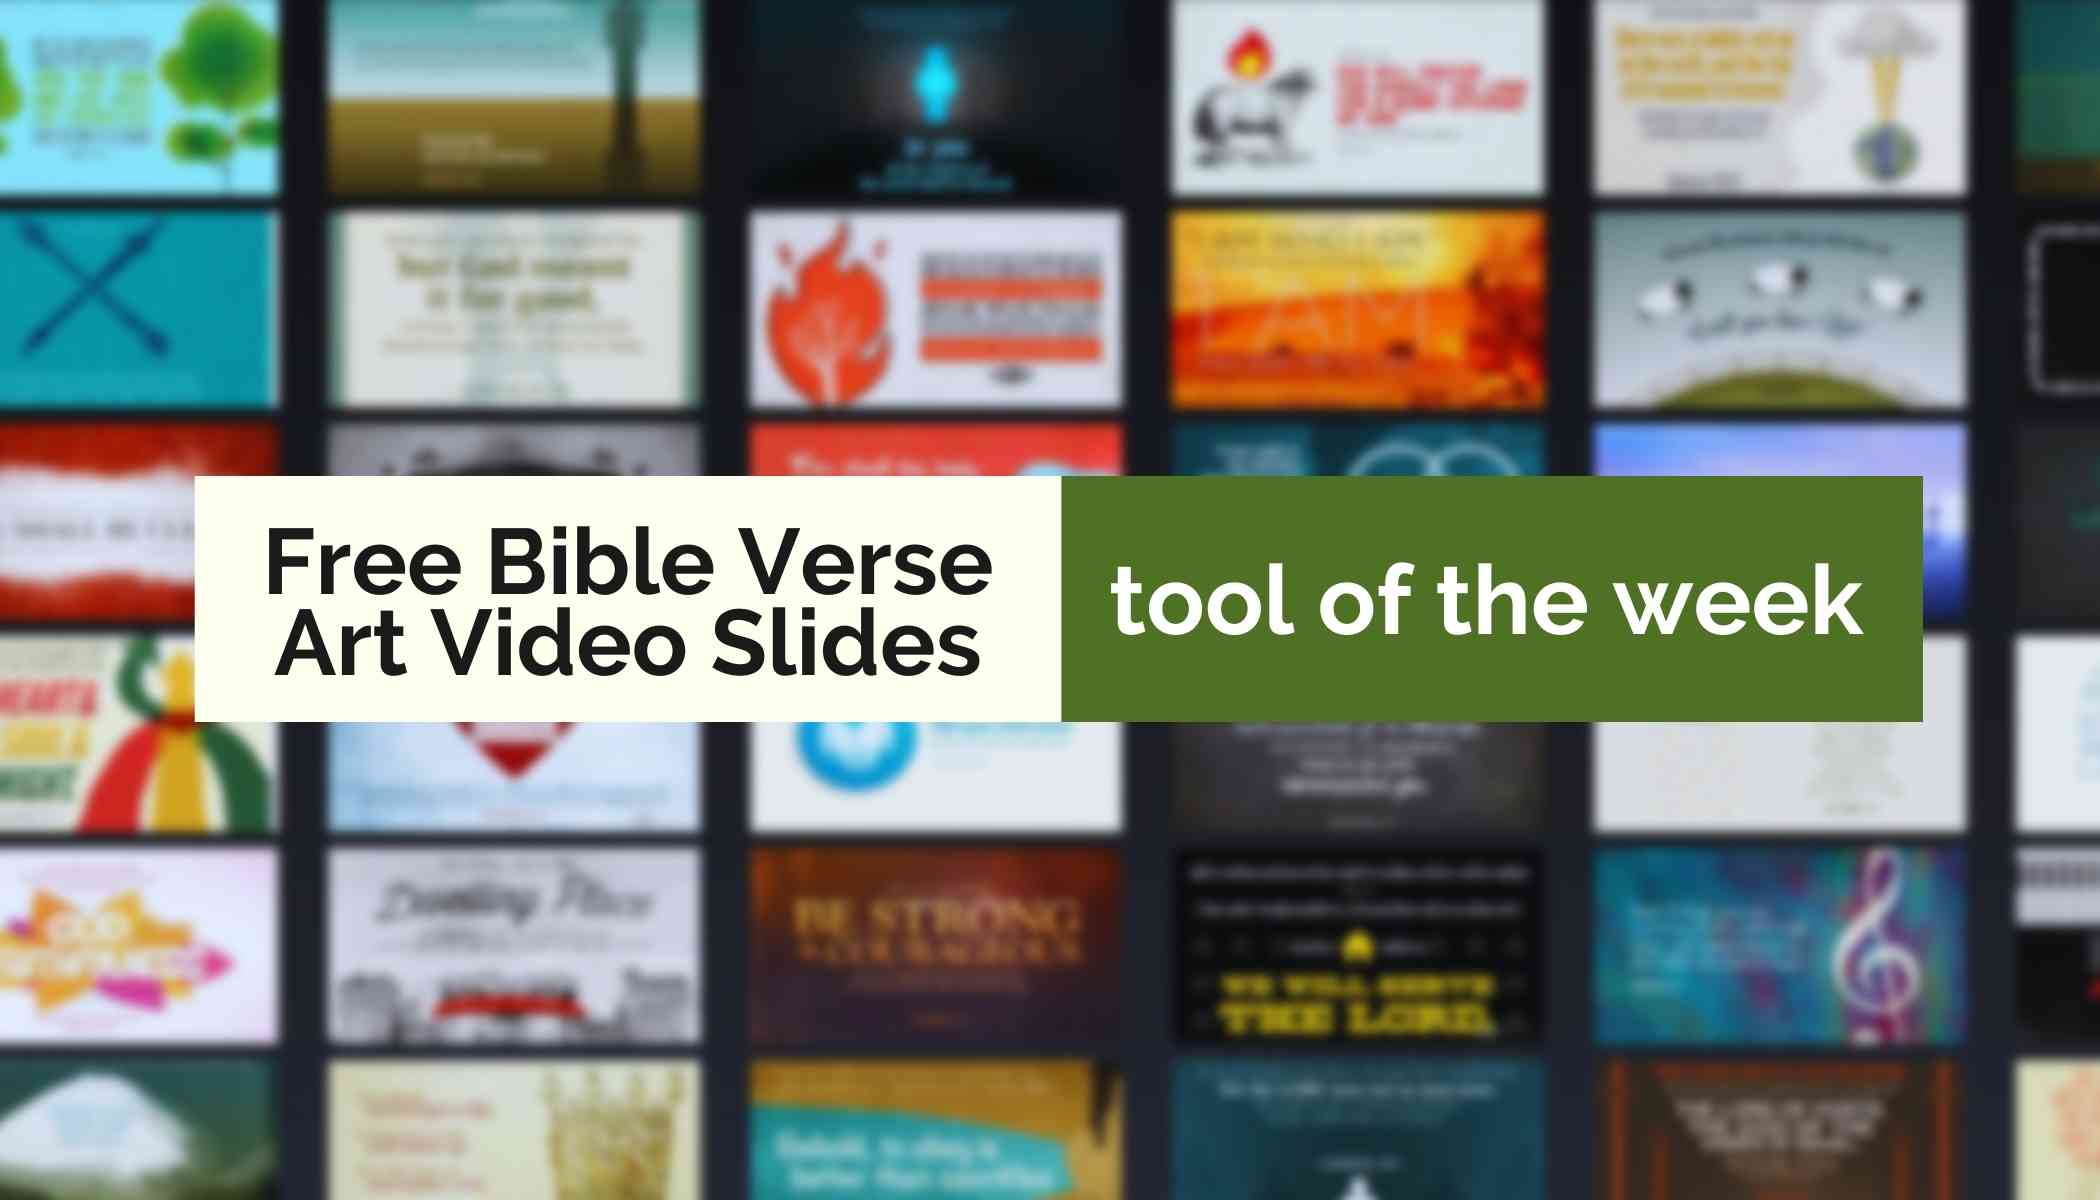 Recommended Tool of the Week - Bible Screen video stream service